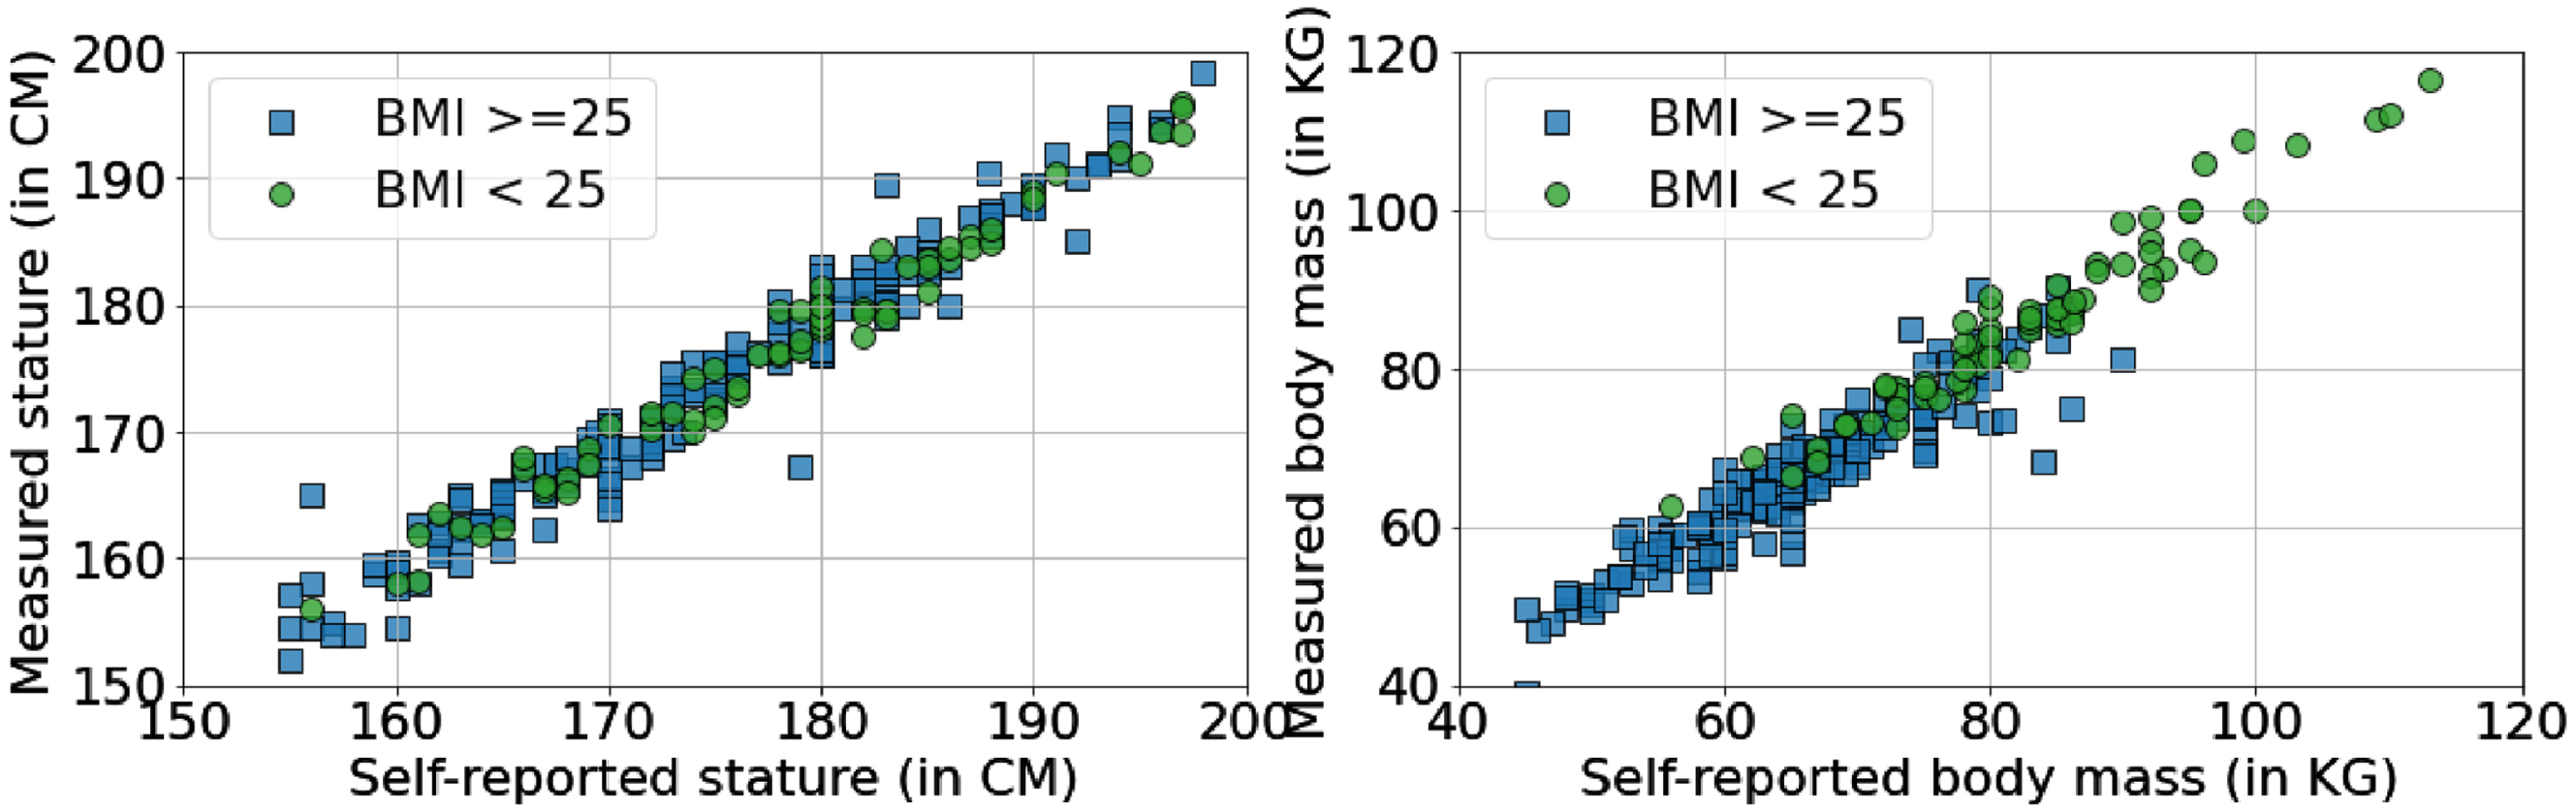 Measured stature and body mass vs the self-reported body mass and stature regarding different BMI groups.